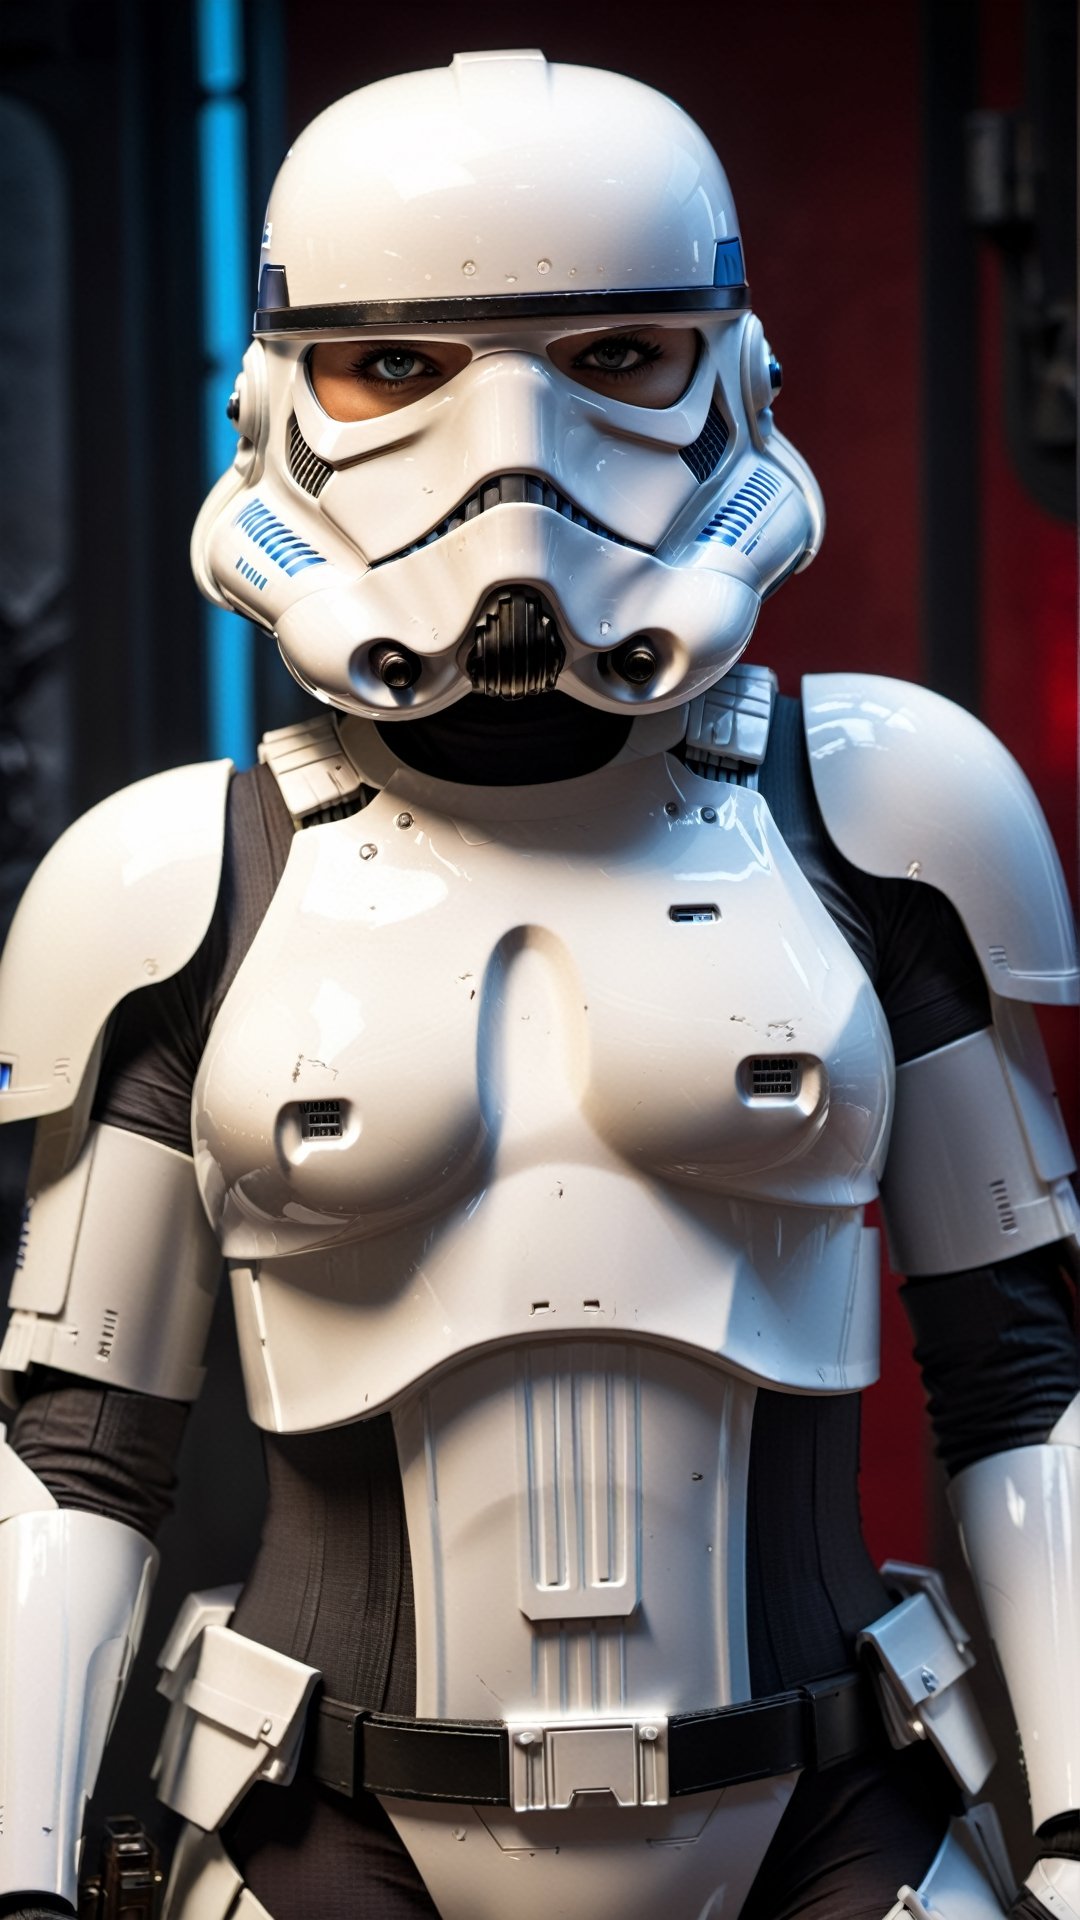 sexy masterpiece, best quality, highest quality, high definition, highly detailed, 8K, front light, female stormtrooper in armor, athletic and fit body, naughty, perfect hands, detailed hands, perfect eyes, detailed eyes, flirty, sexy, naughty, posing, hands and arms at sides, large perky boobs, realistic, HDR, UHD, dynamic, cleavage, battle background